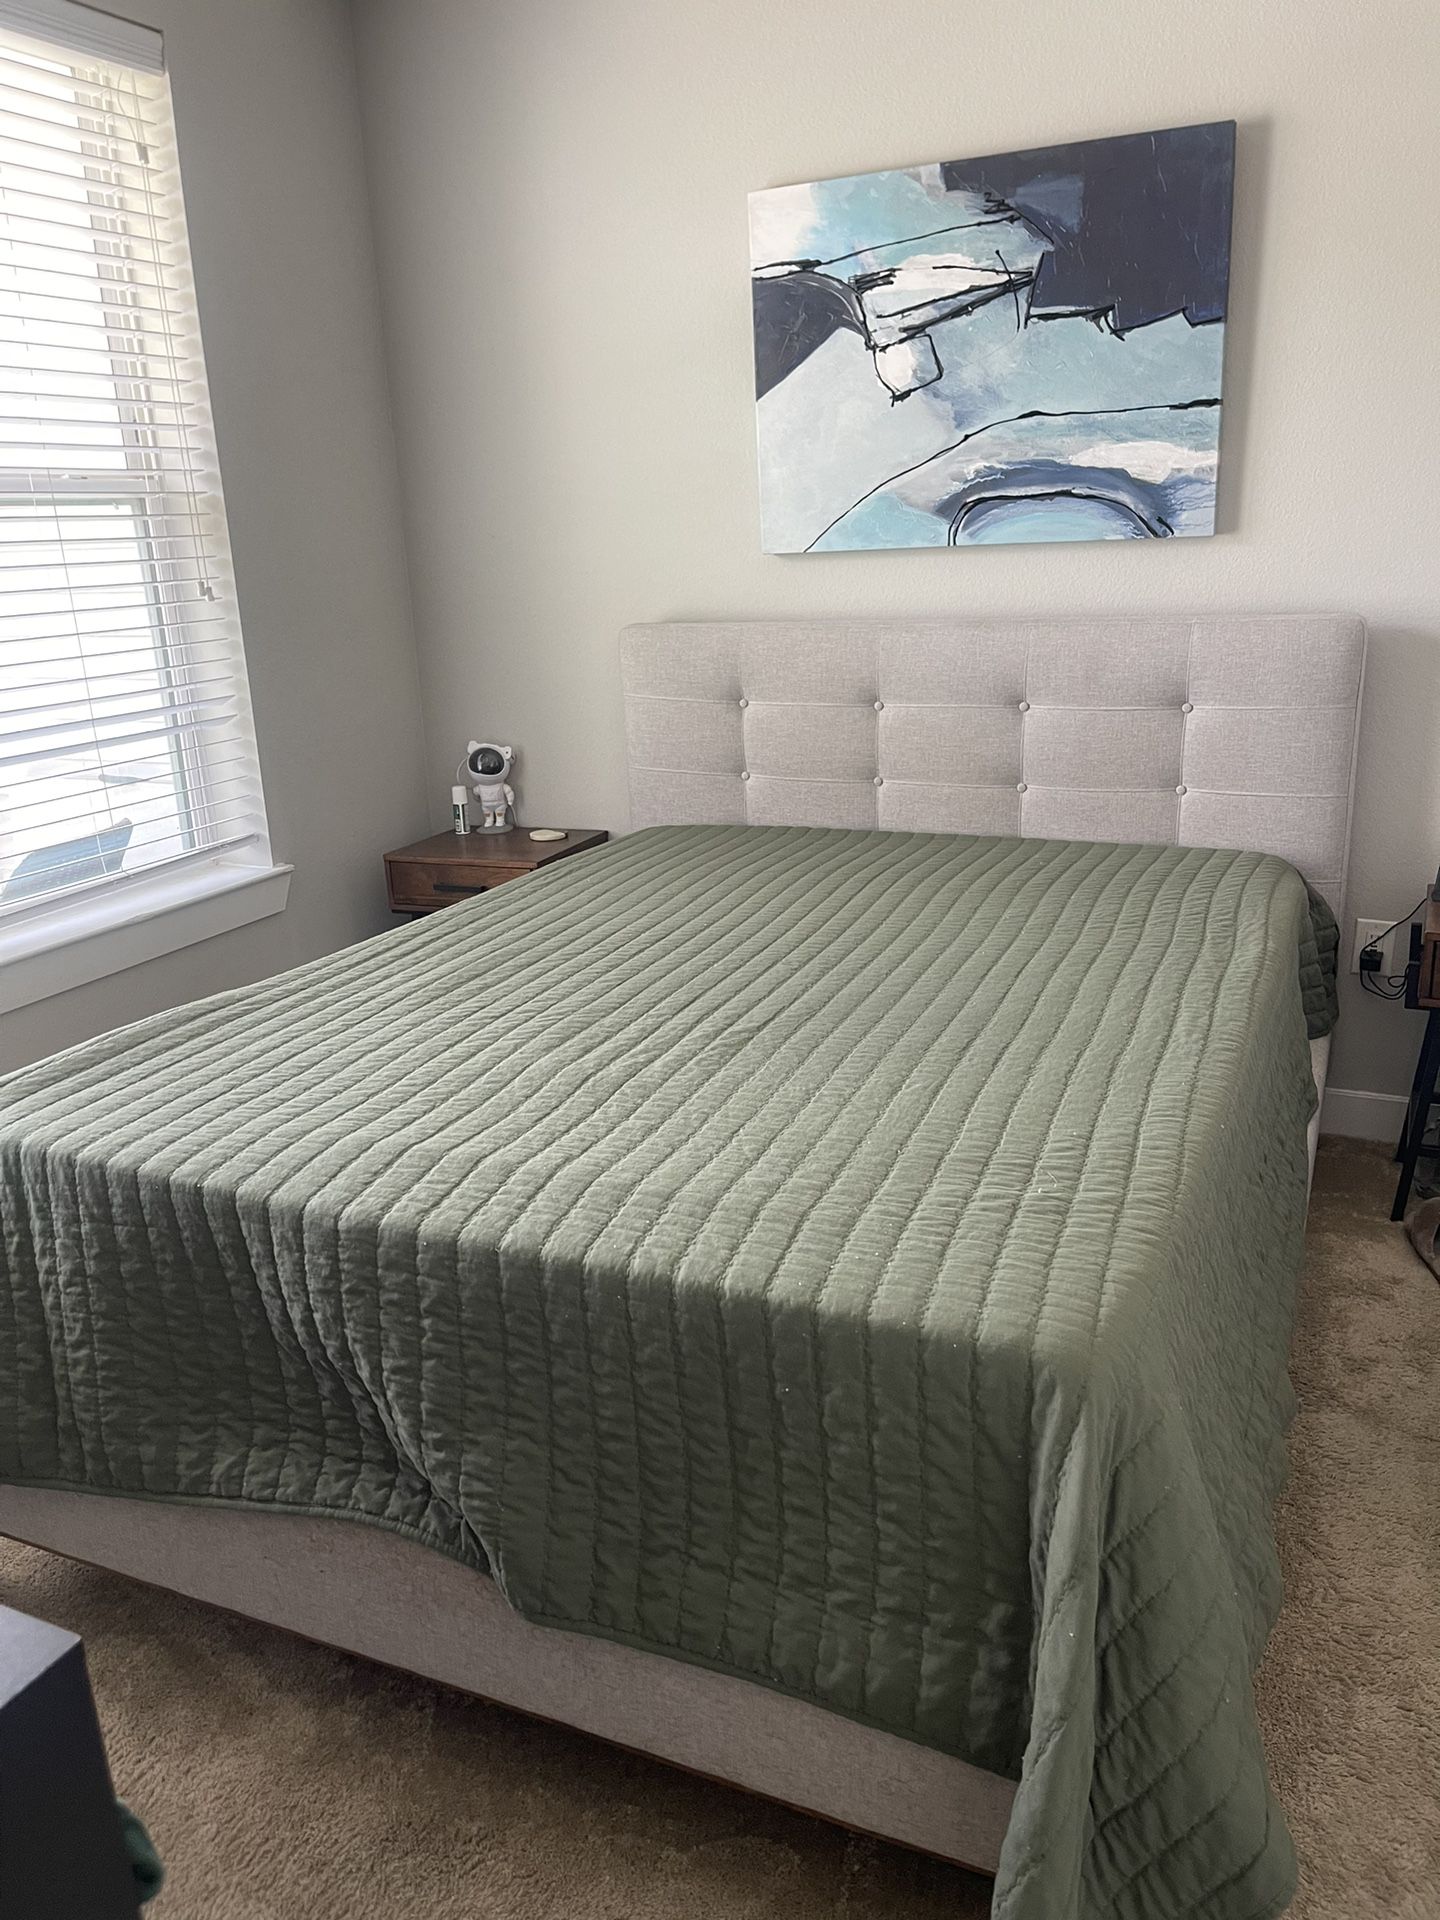 Queen size Bed Frame 